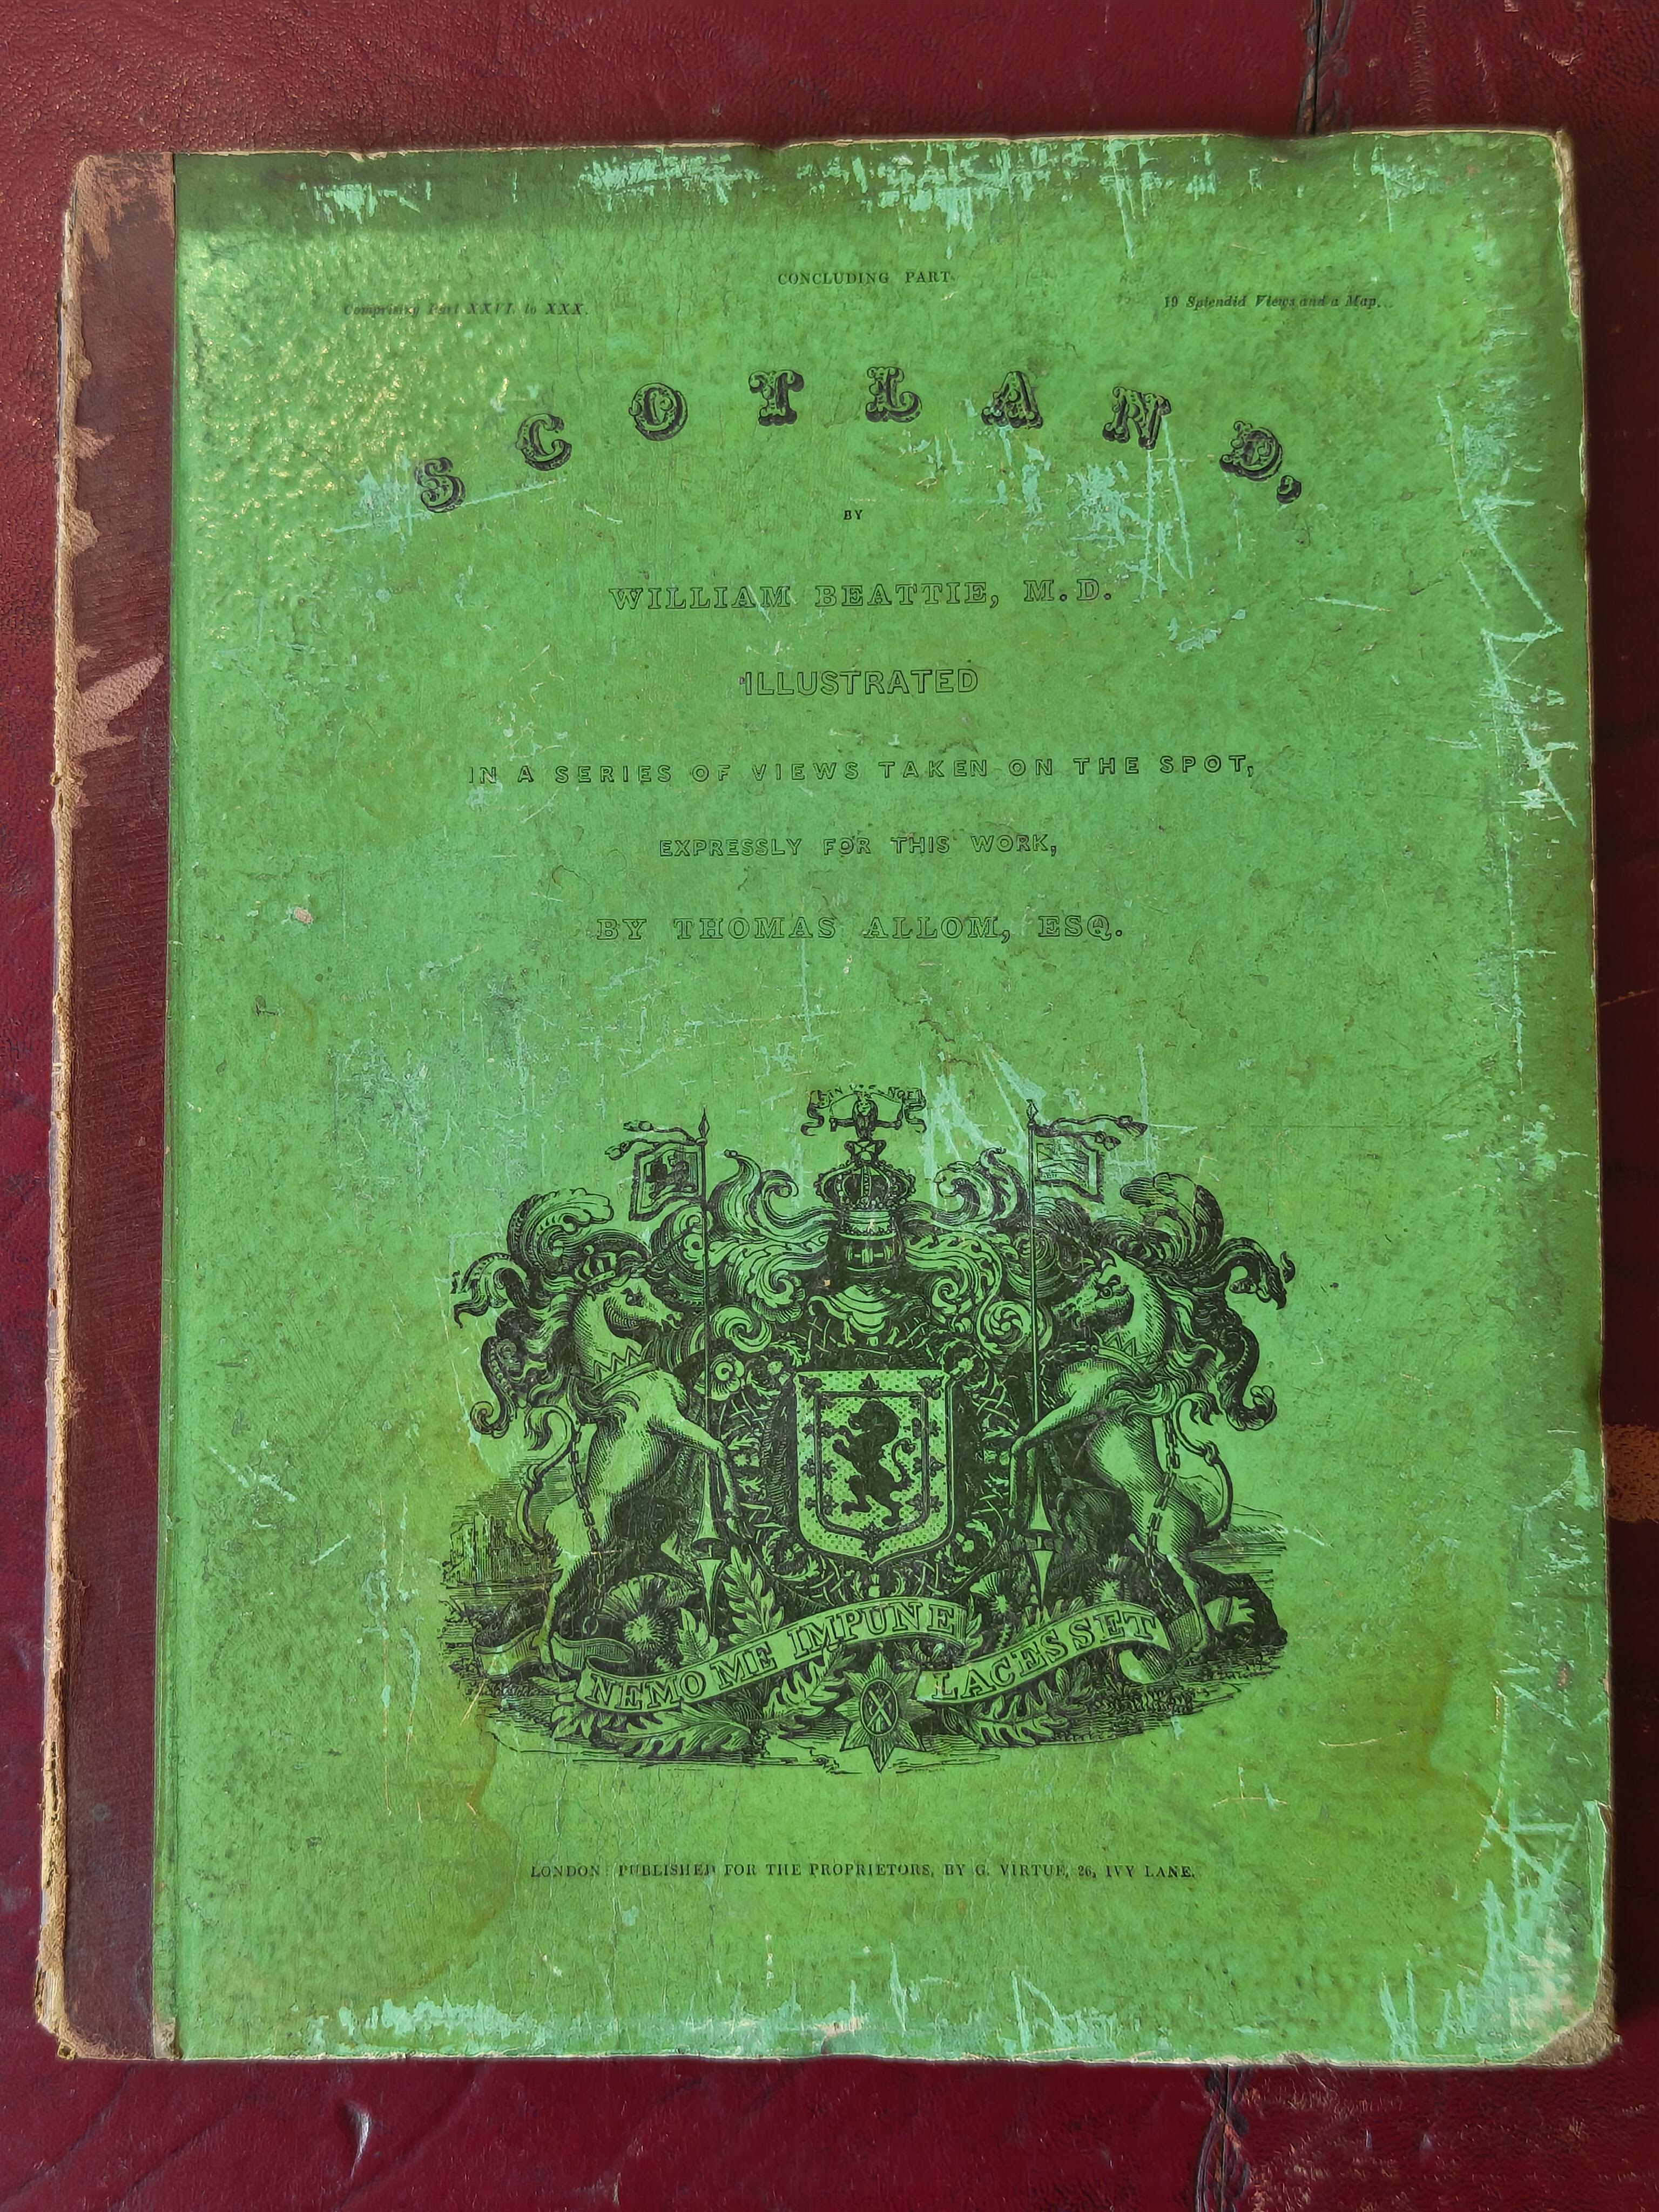 Scottish Topography. Select Views of the Royal Palaces of Scotland, 1830 and others